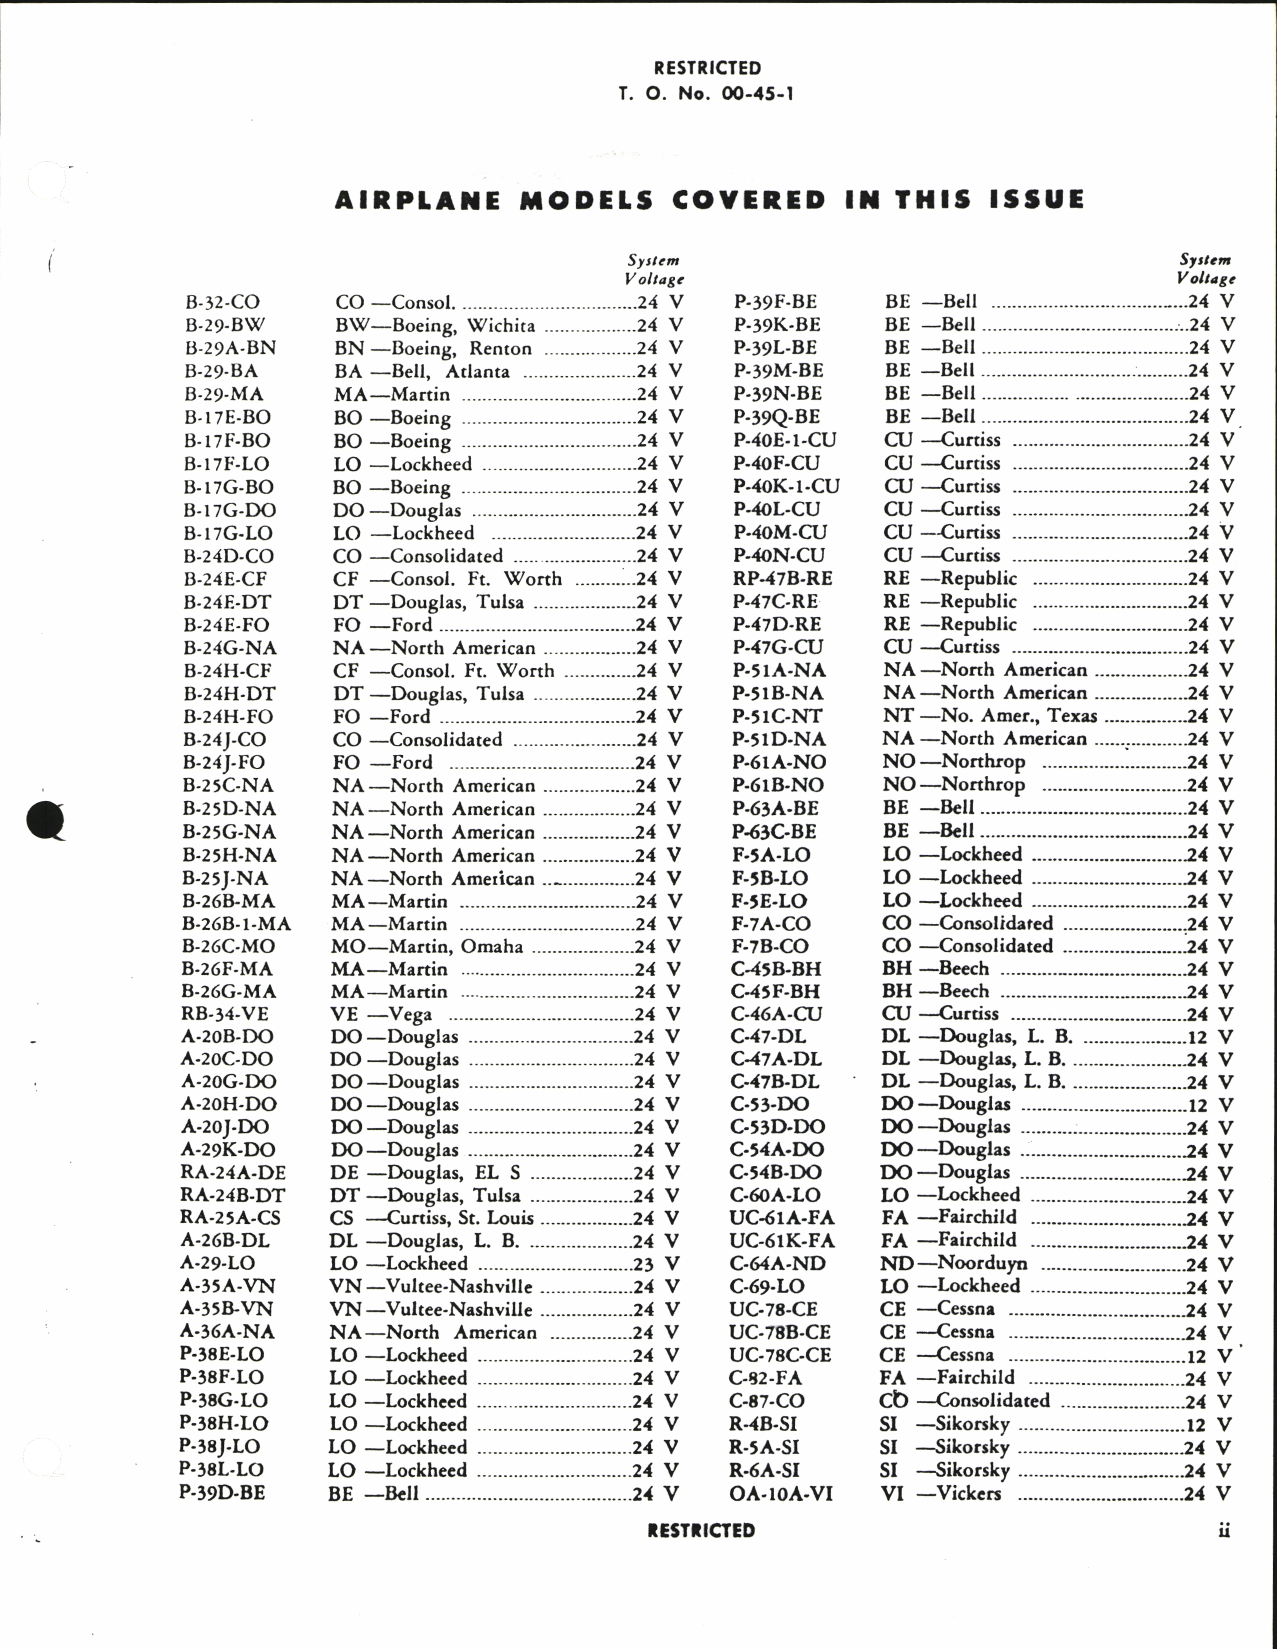 Sample page 5 from AirCorps Library document: Accessories for Airplanes; Engines Interchangeability Charts Listing Original and Cross reference Charts